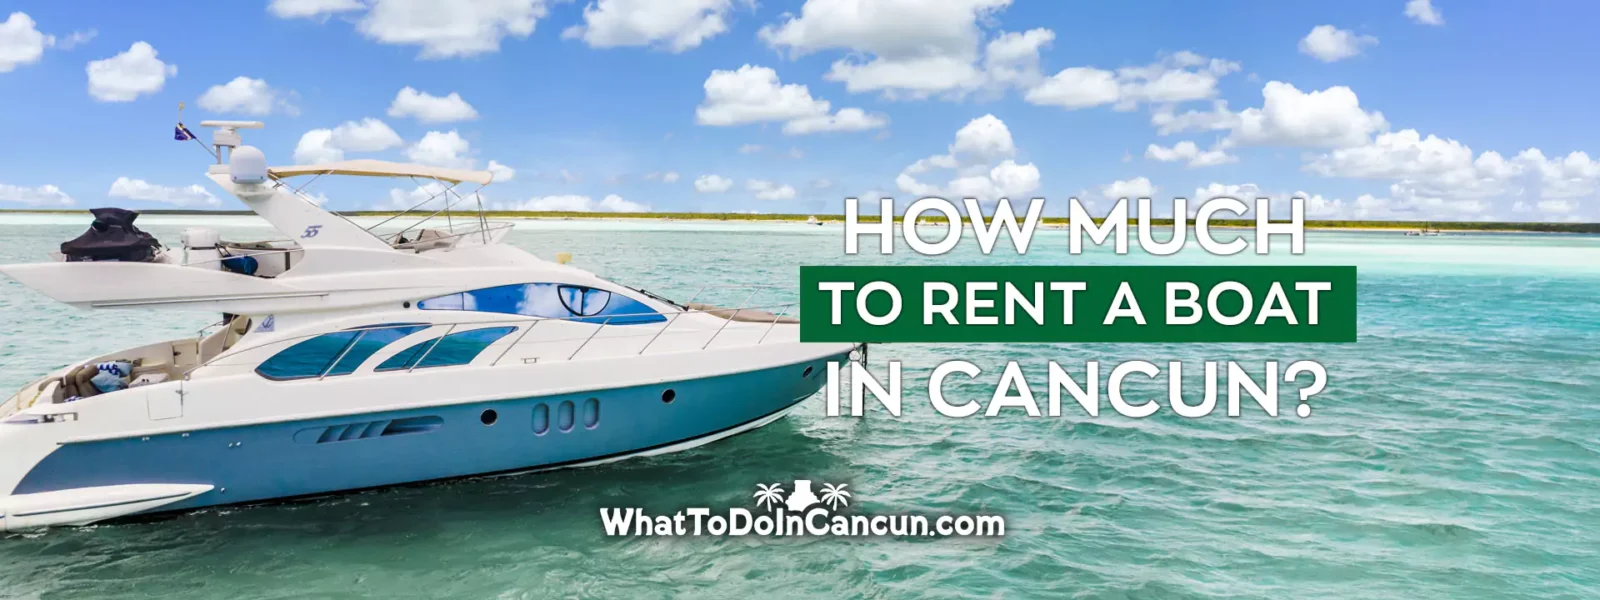 how-much-to-rent-a-boat-in-cancun